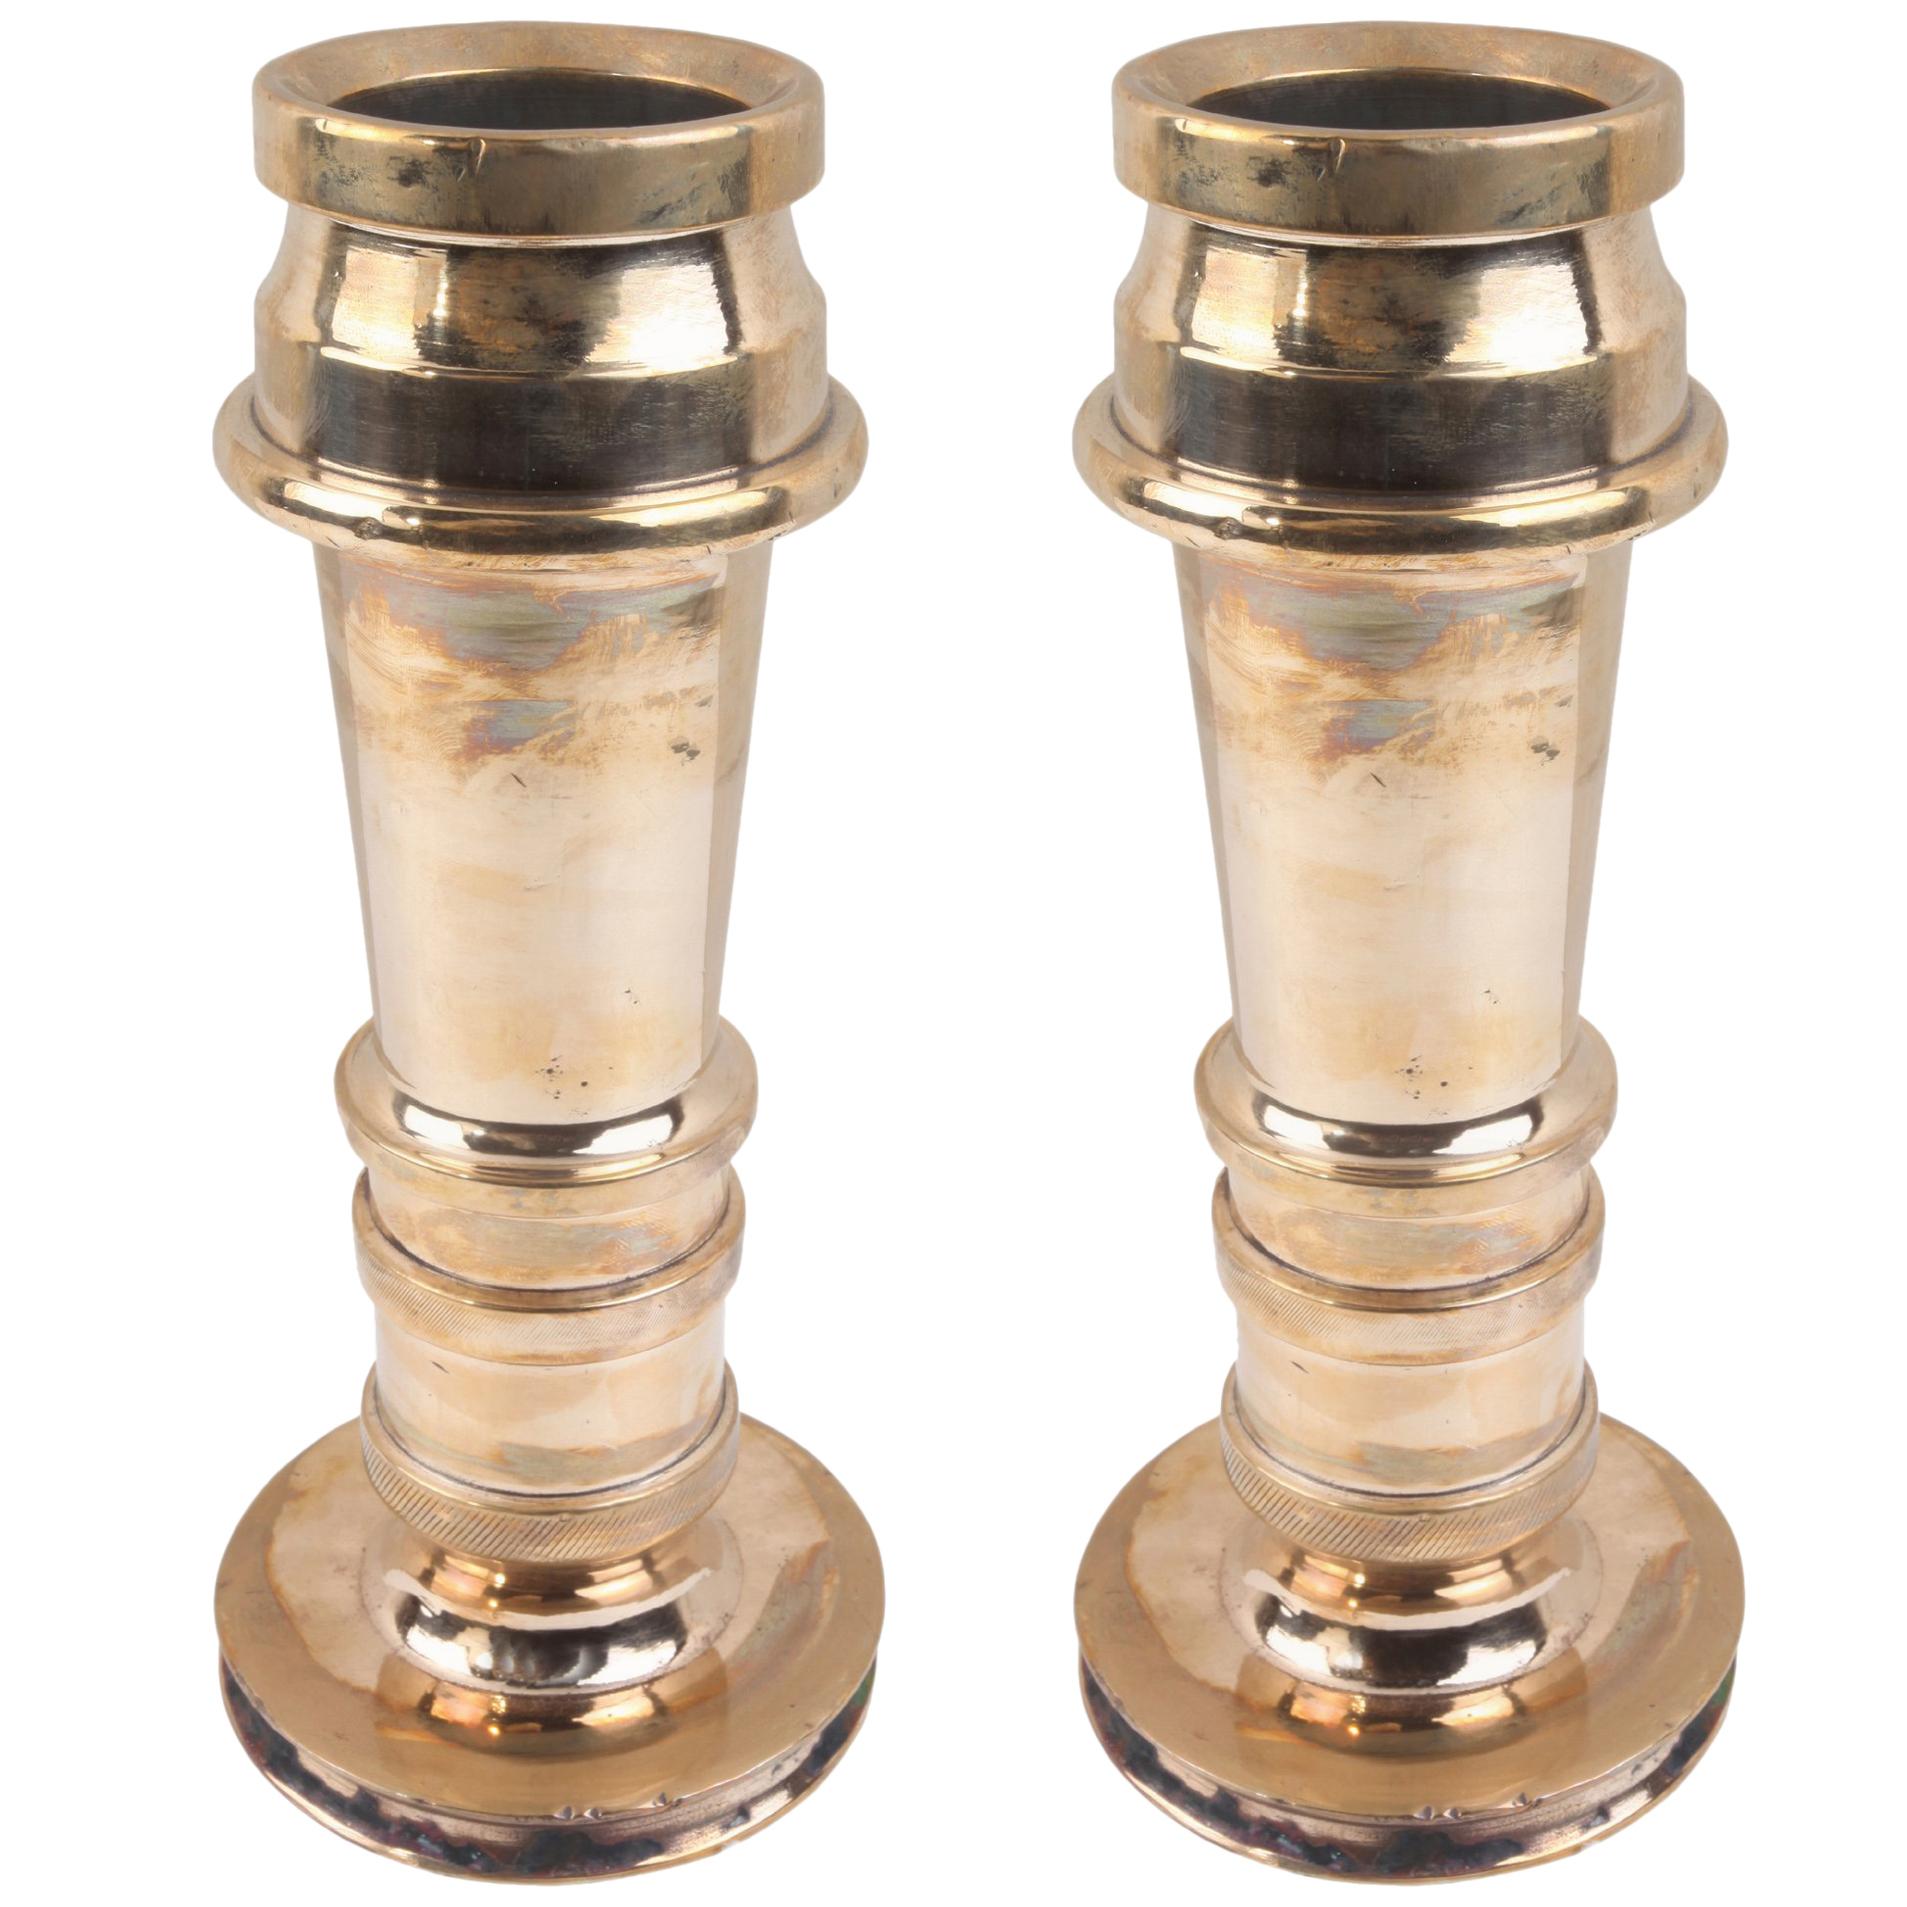 Brass Vases or Candlestands Originally Fire-Hose Nozzles